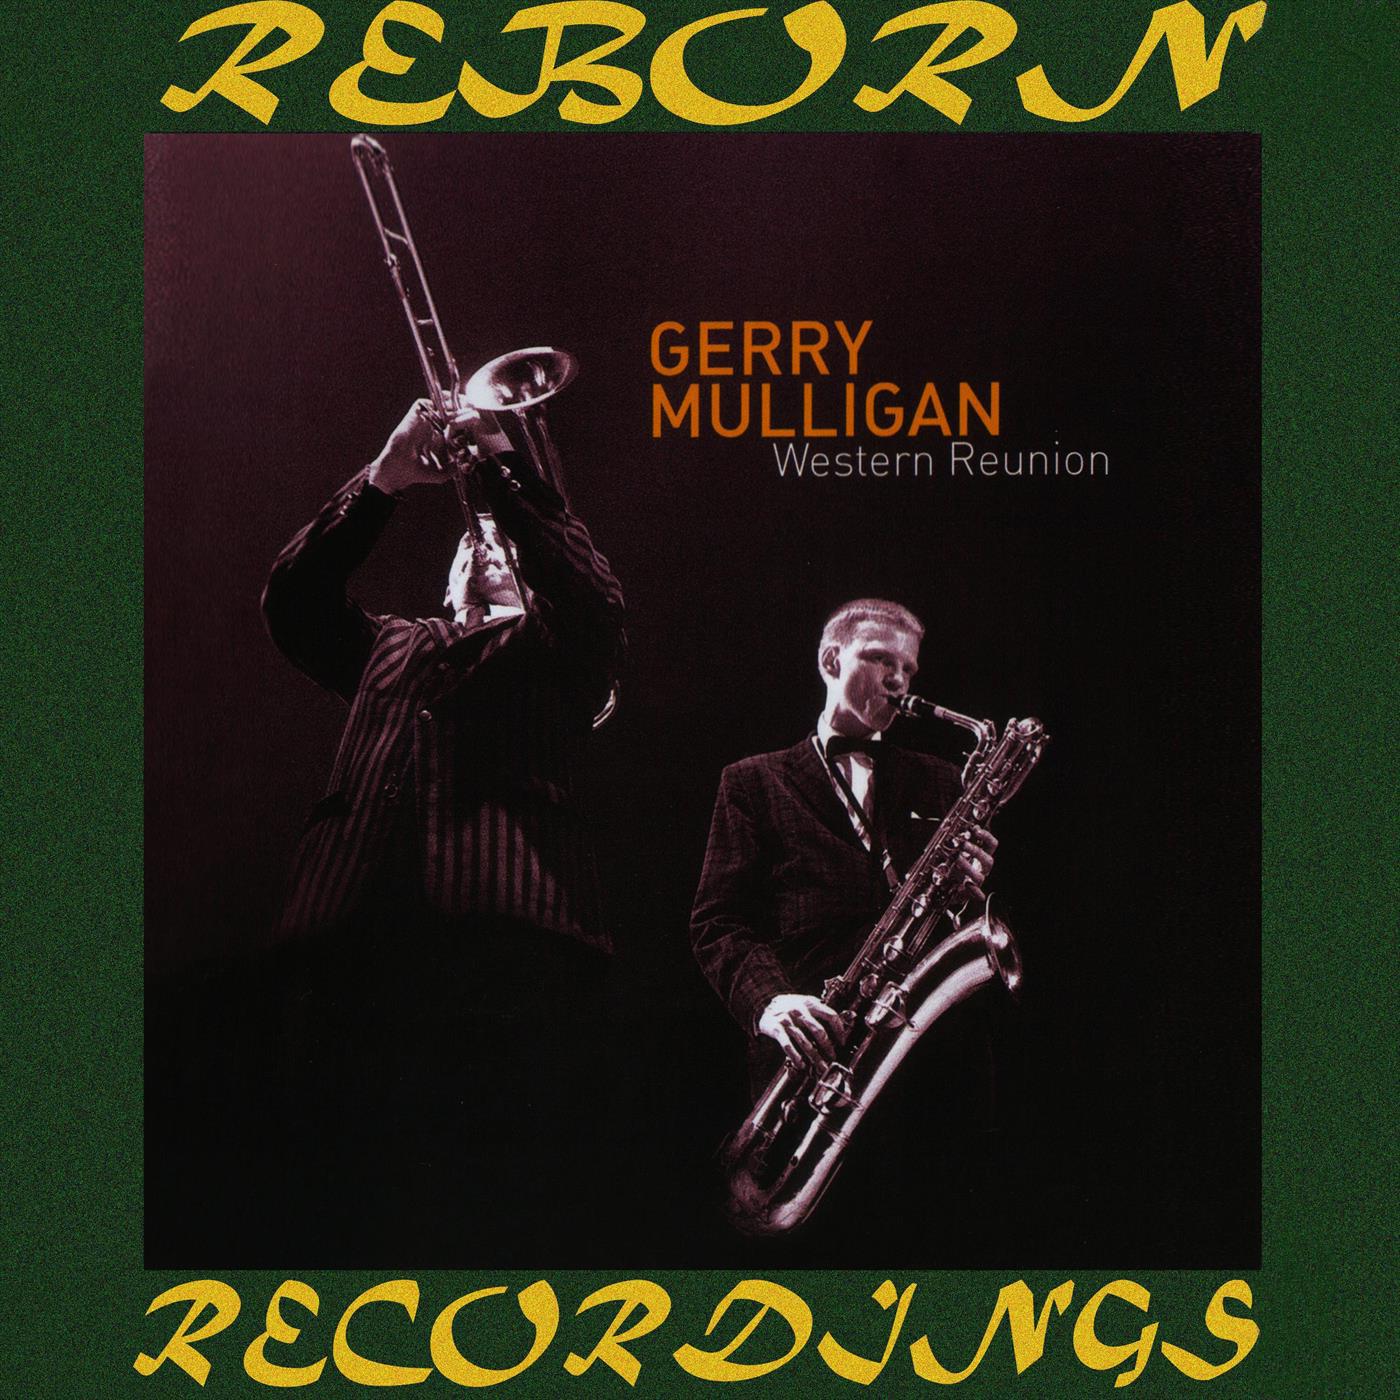 Introduction by Gerry Mulligan